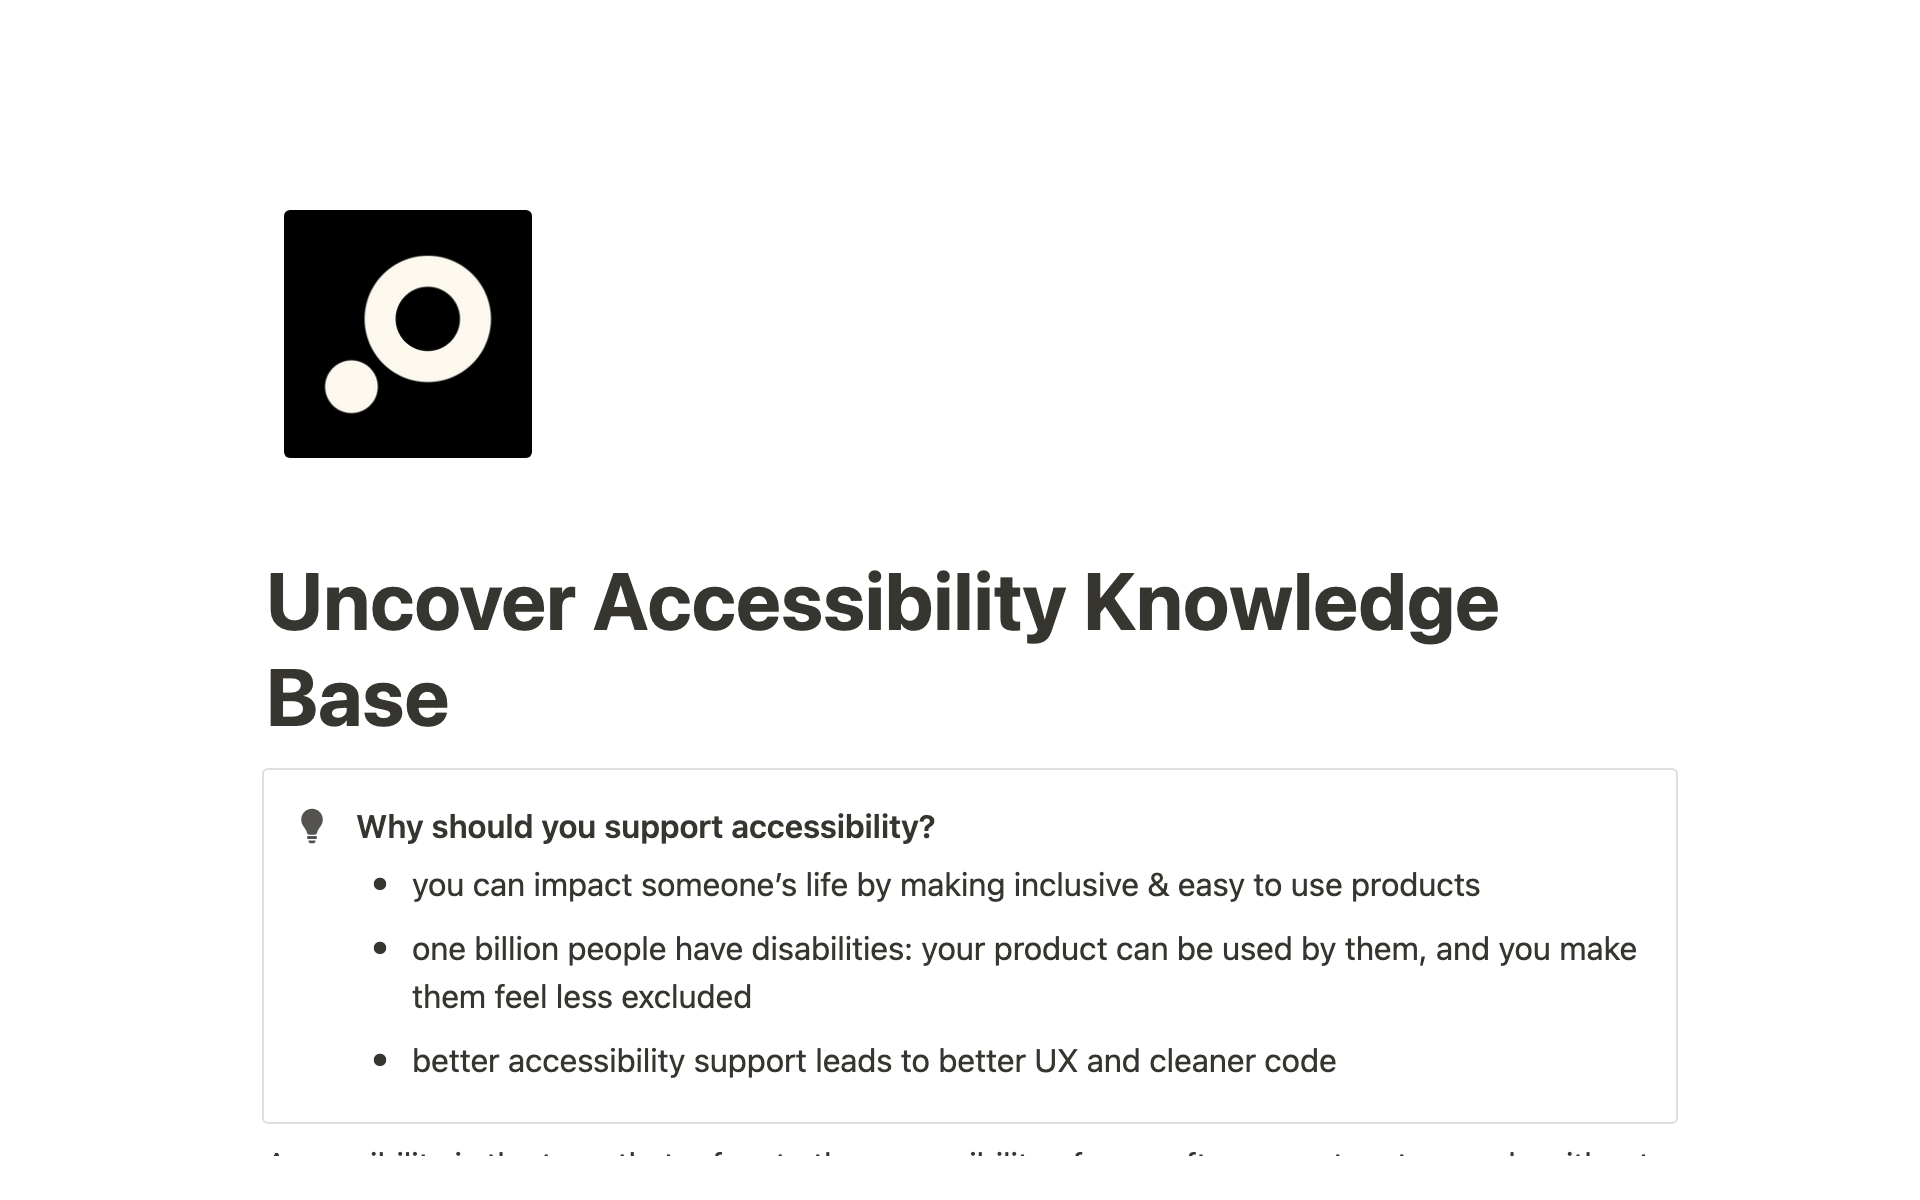 Our accessibility knowledge base provides a collection of resources, helpful tools, templates and knowledge to assist individuals in gaining information and understanding about accessibility.